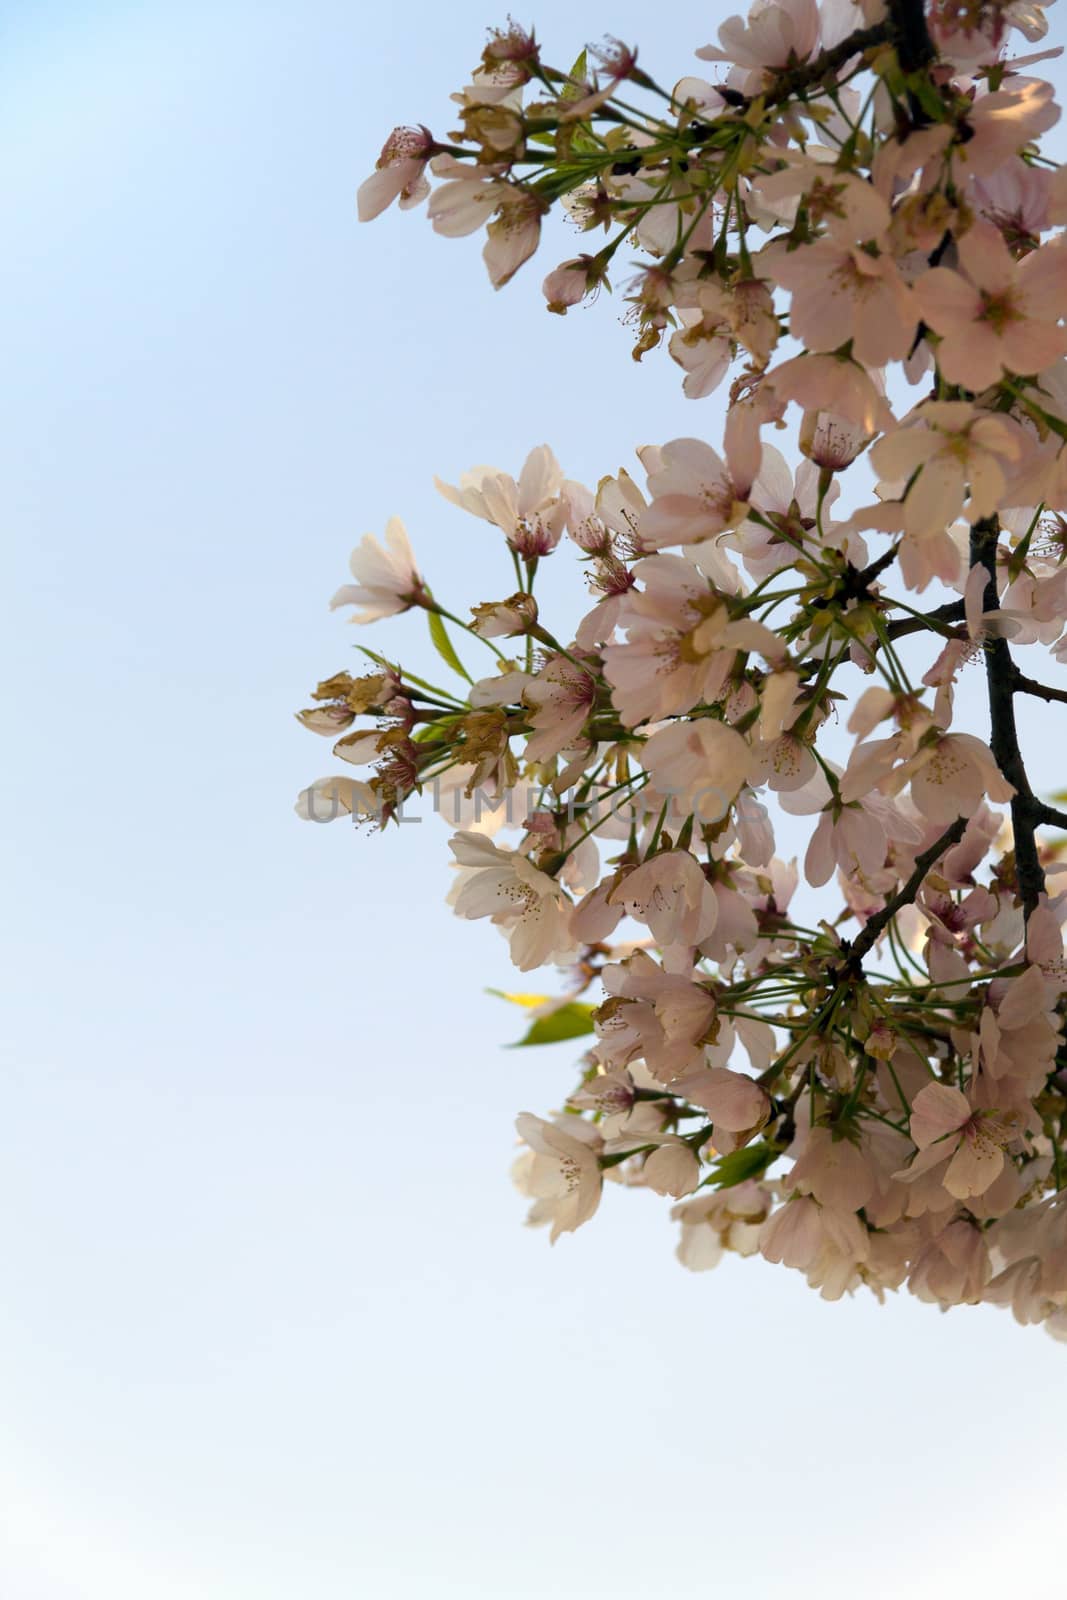 Branches and flowers of a Cherry Blossom tree in bloom